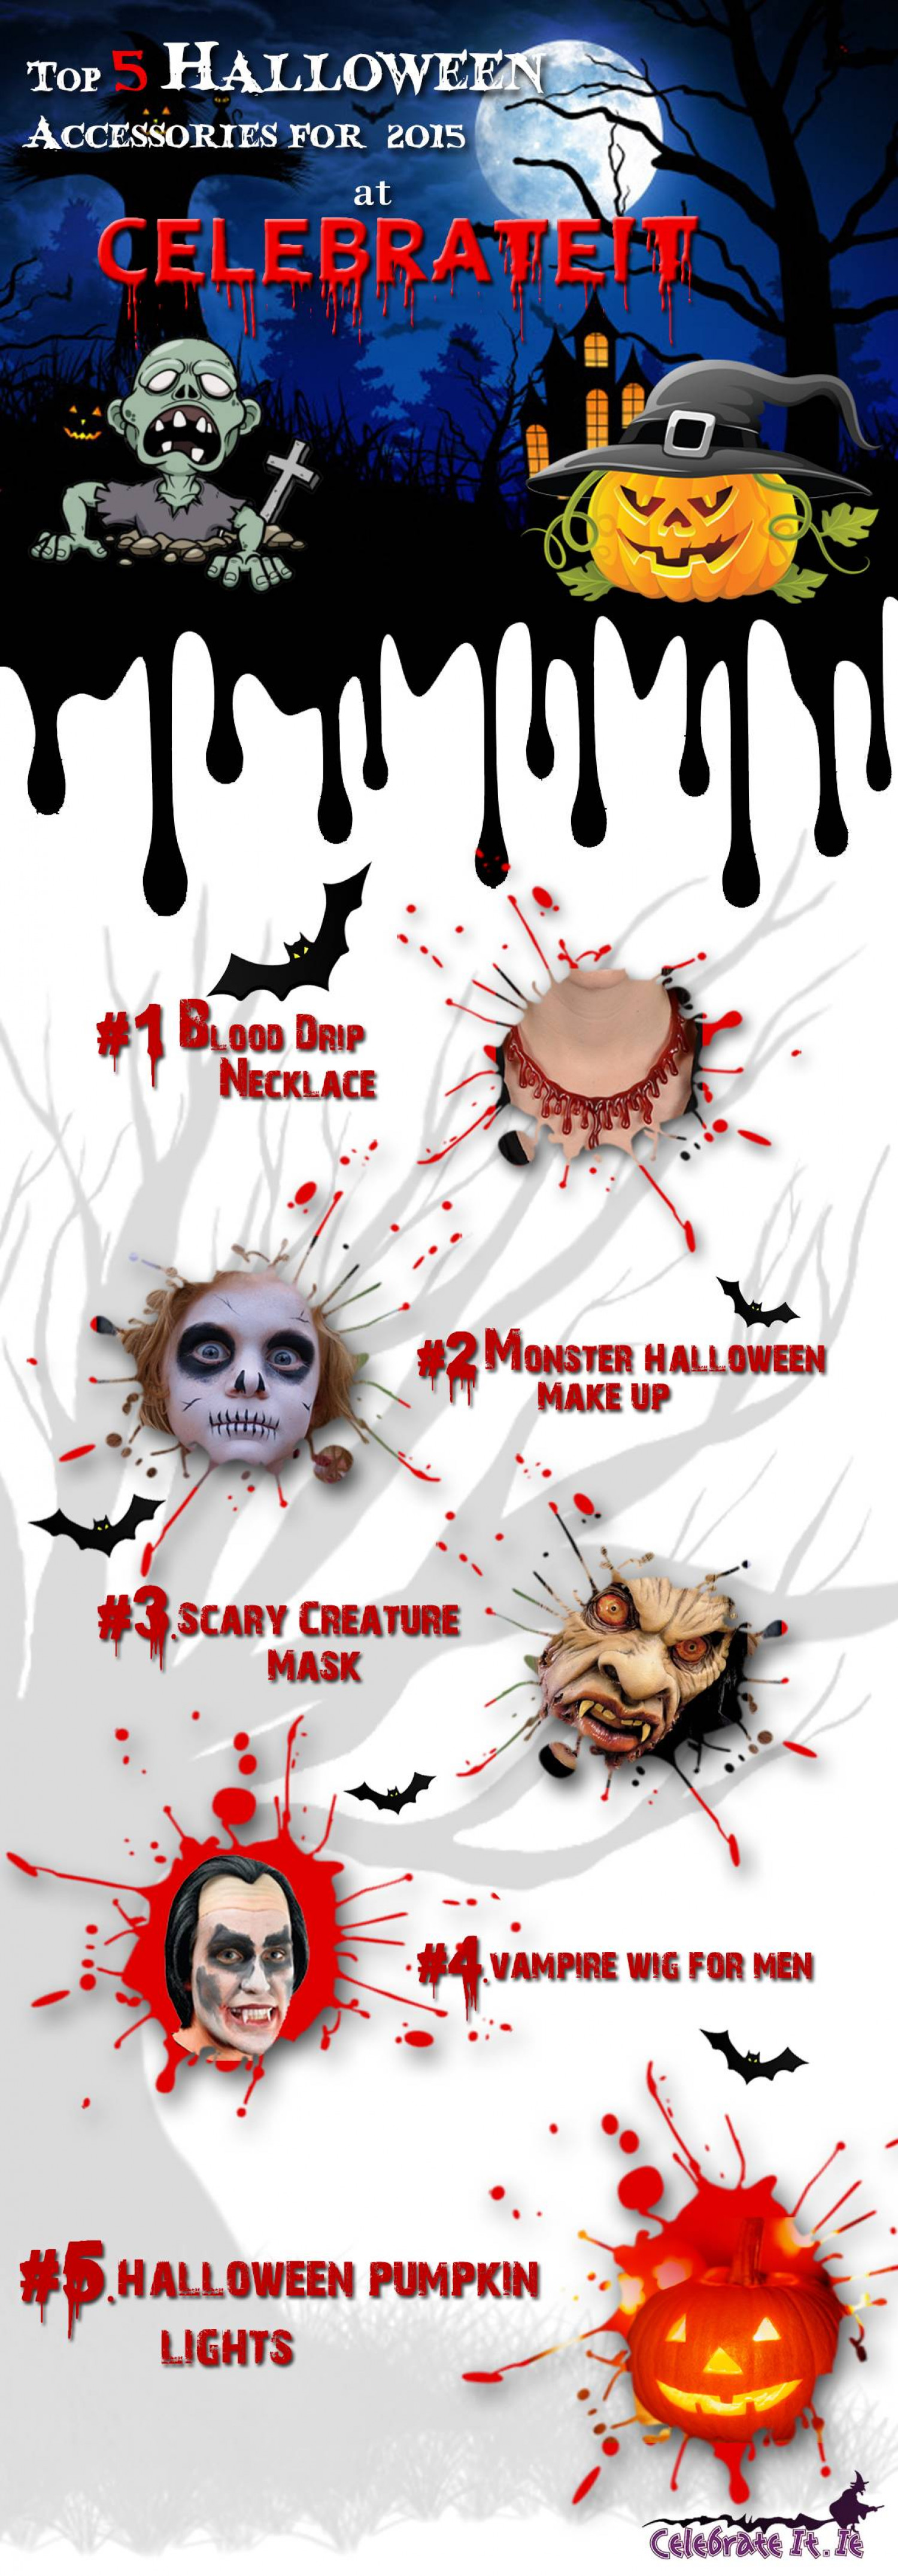 Top 5 Halloween Accessories for 2015  Infographic